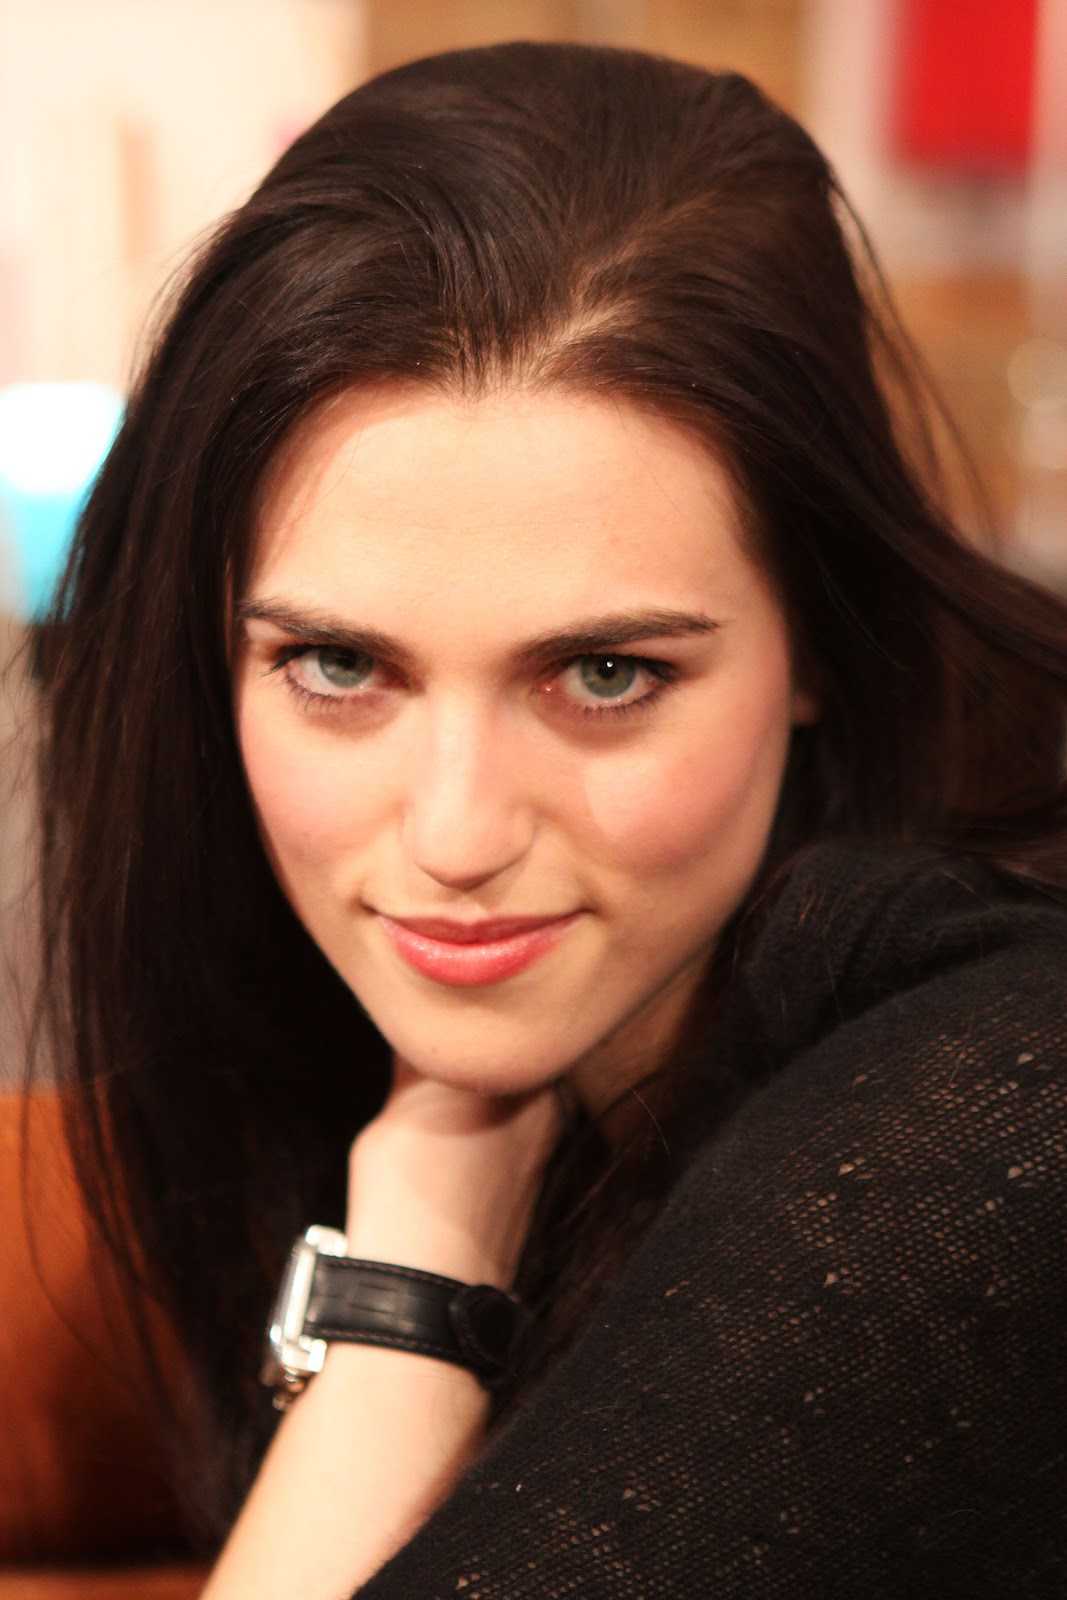 75+ Hot Pictures Of Katie McGrath – Lena Luthor Actress In Supergirl TV Show | Best Of Comic Books